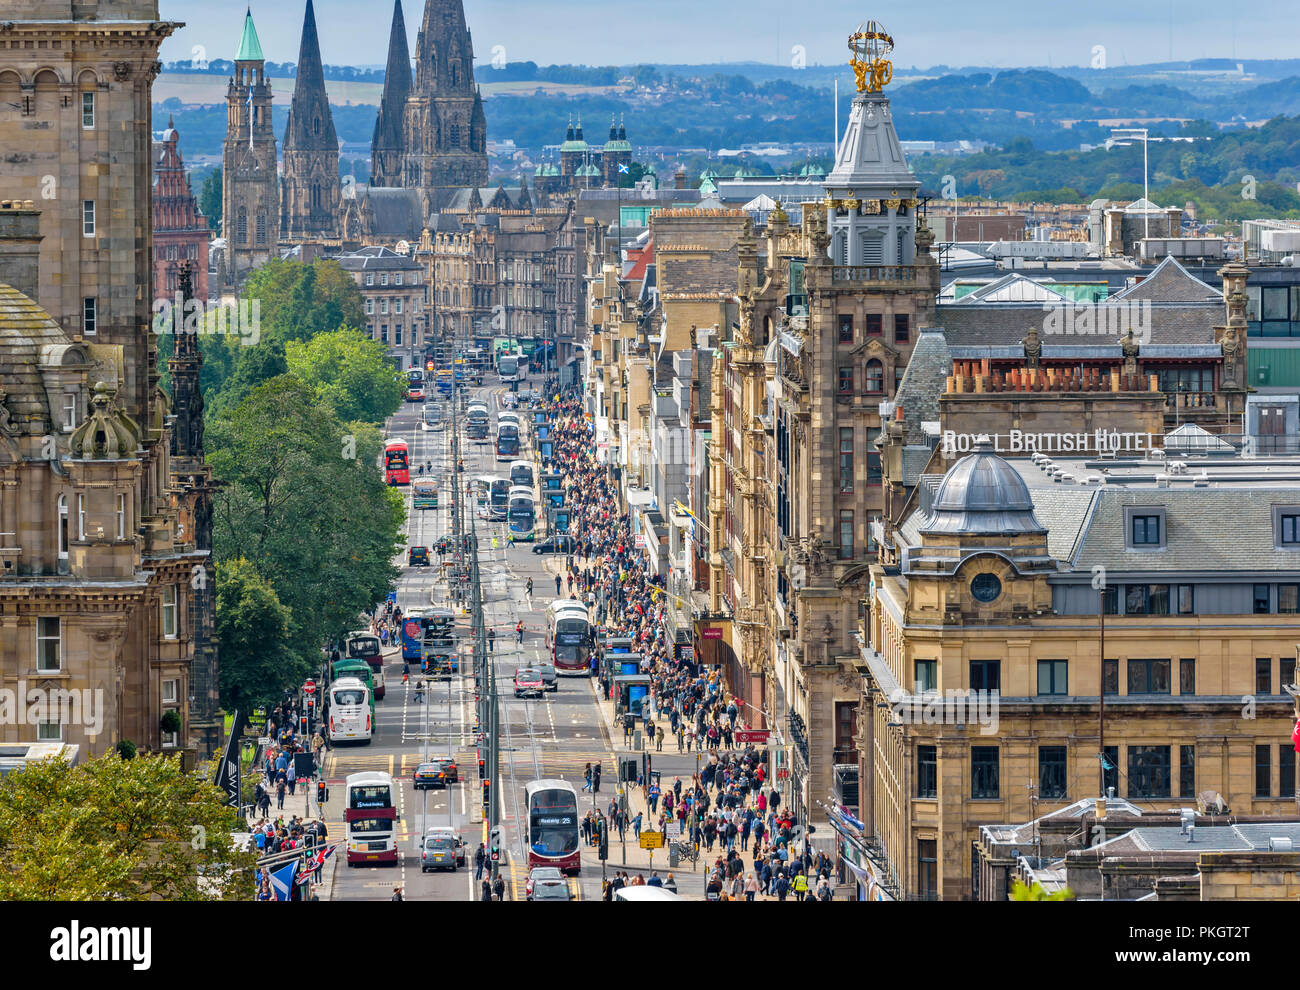 EDINBURGH SCOTLAND PRINCES STREET WITH PEOPLE SHOPPING AND MANY BUSES Stock Photo